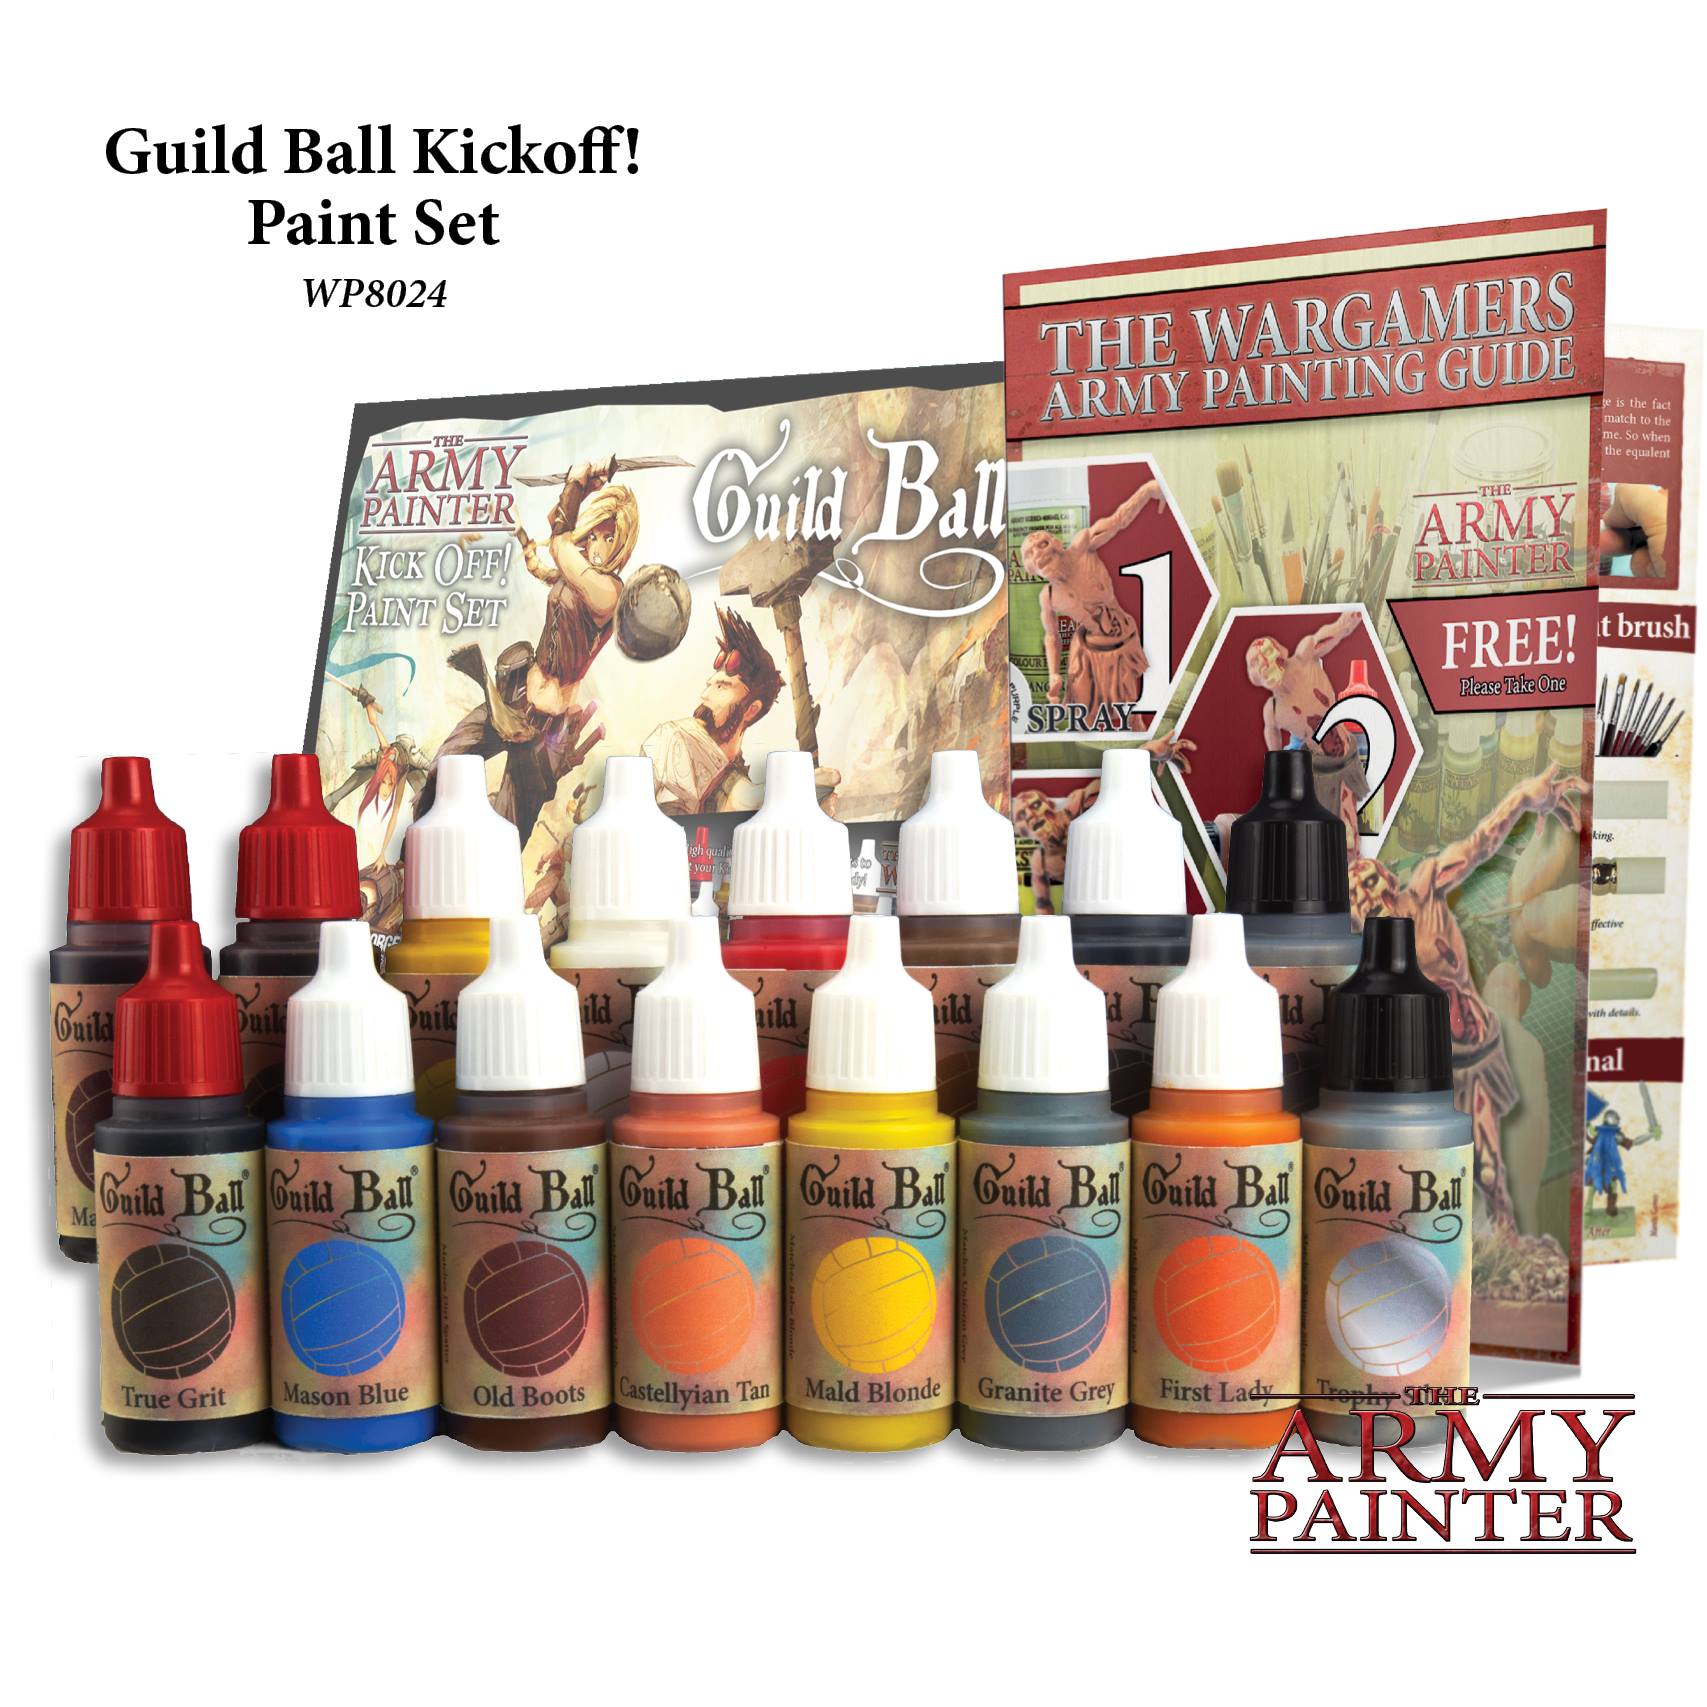 The Army Painter Pairs Guild Ball Kickoff With Two Team Paint Set Ontabletop Home Of Beasts Of War